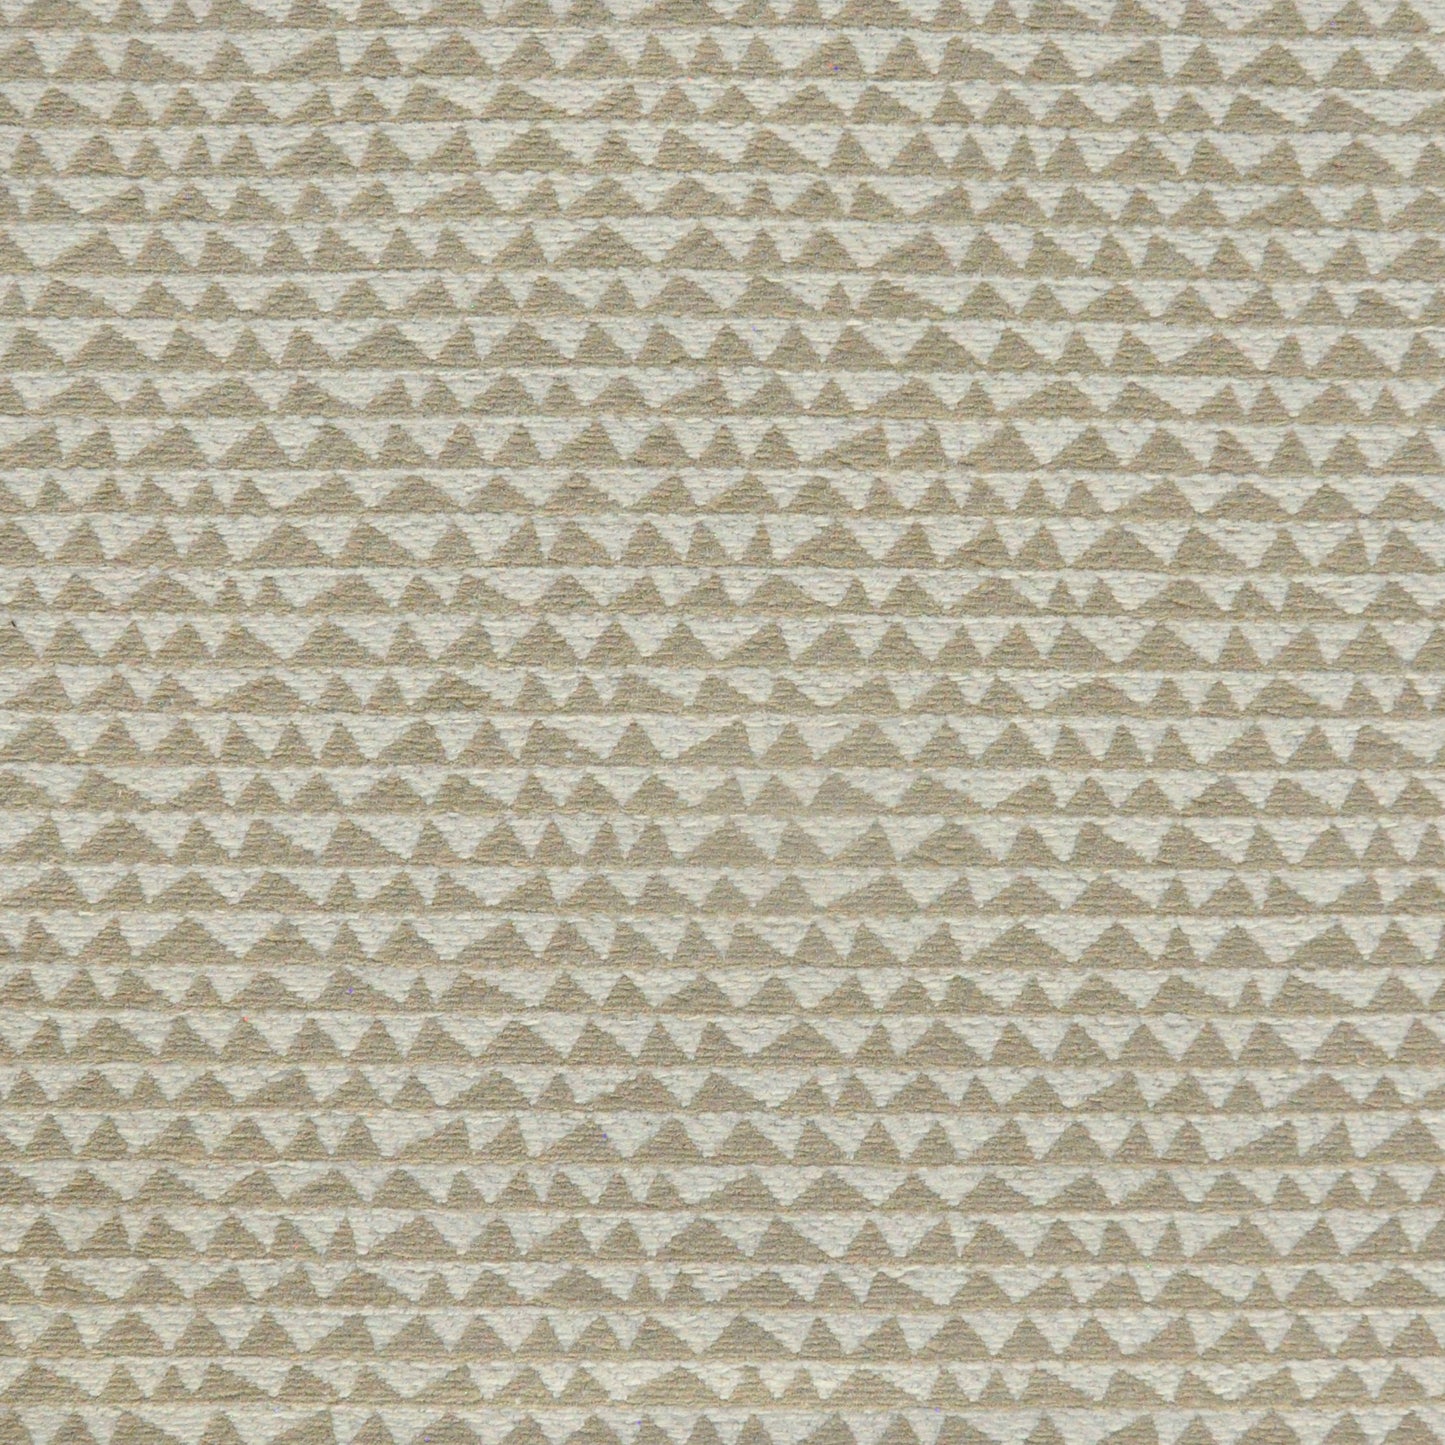 Purchase Maxwell Fabric - Mountaineer, # 836 Dust